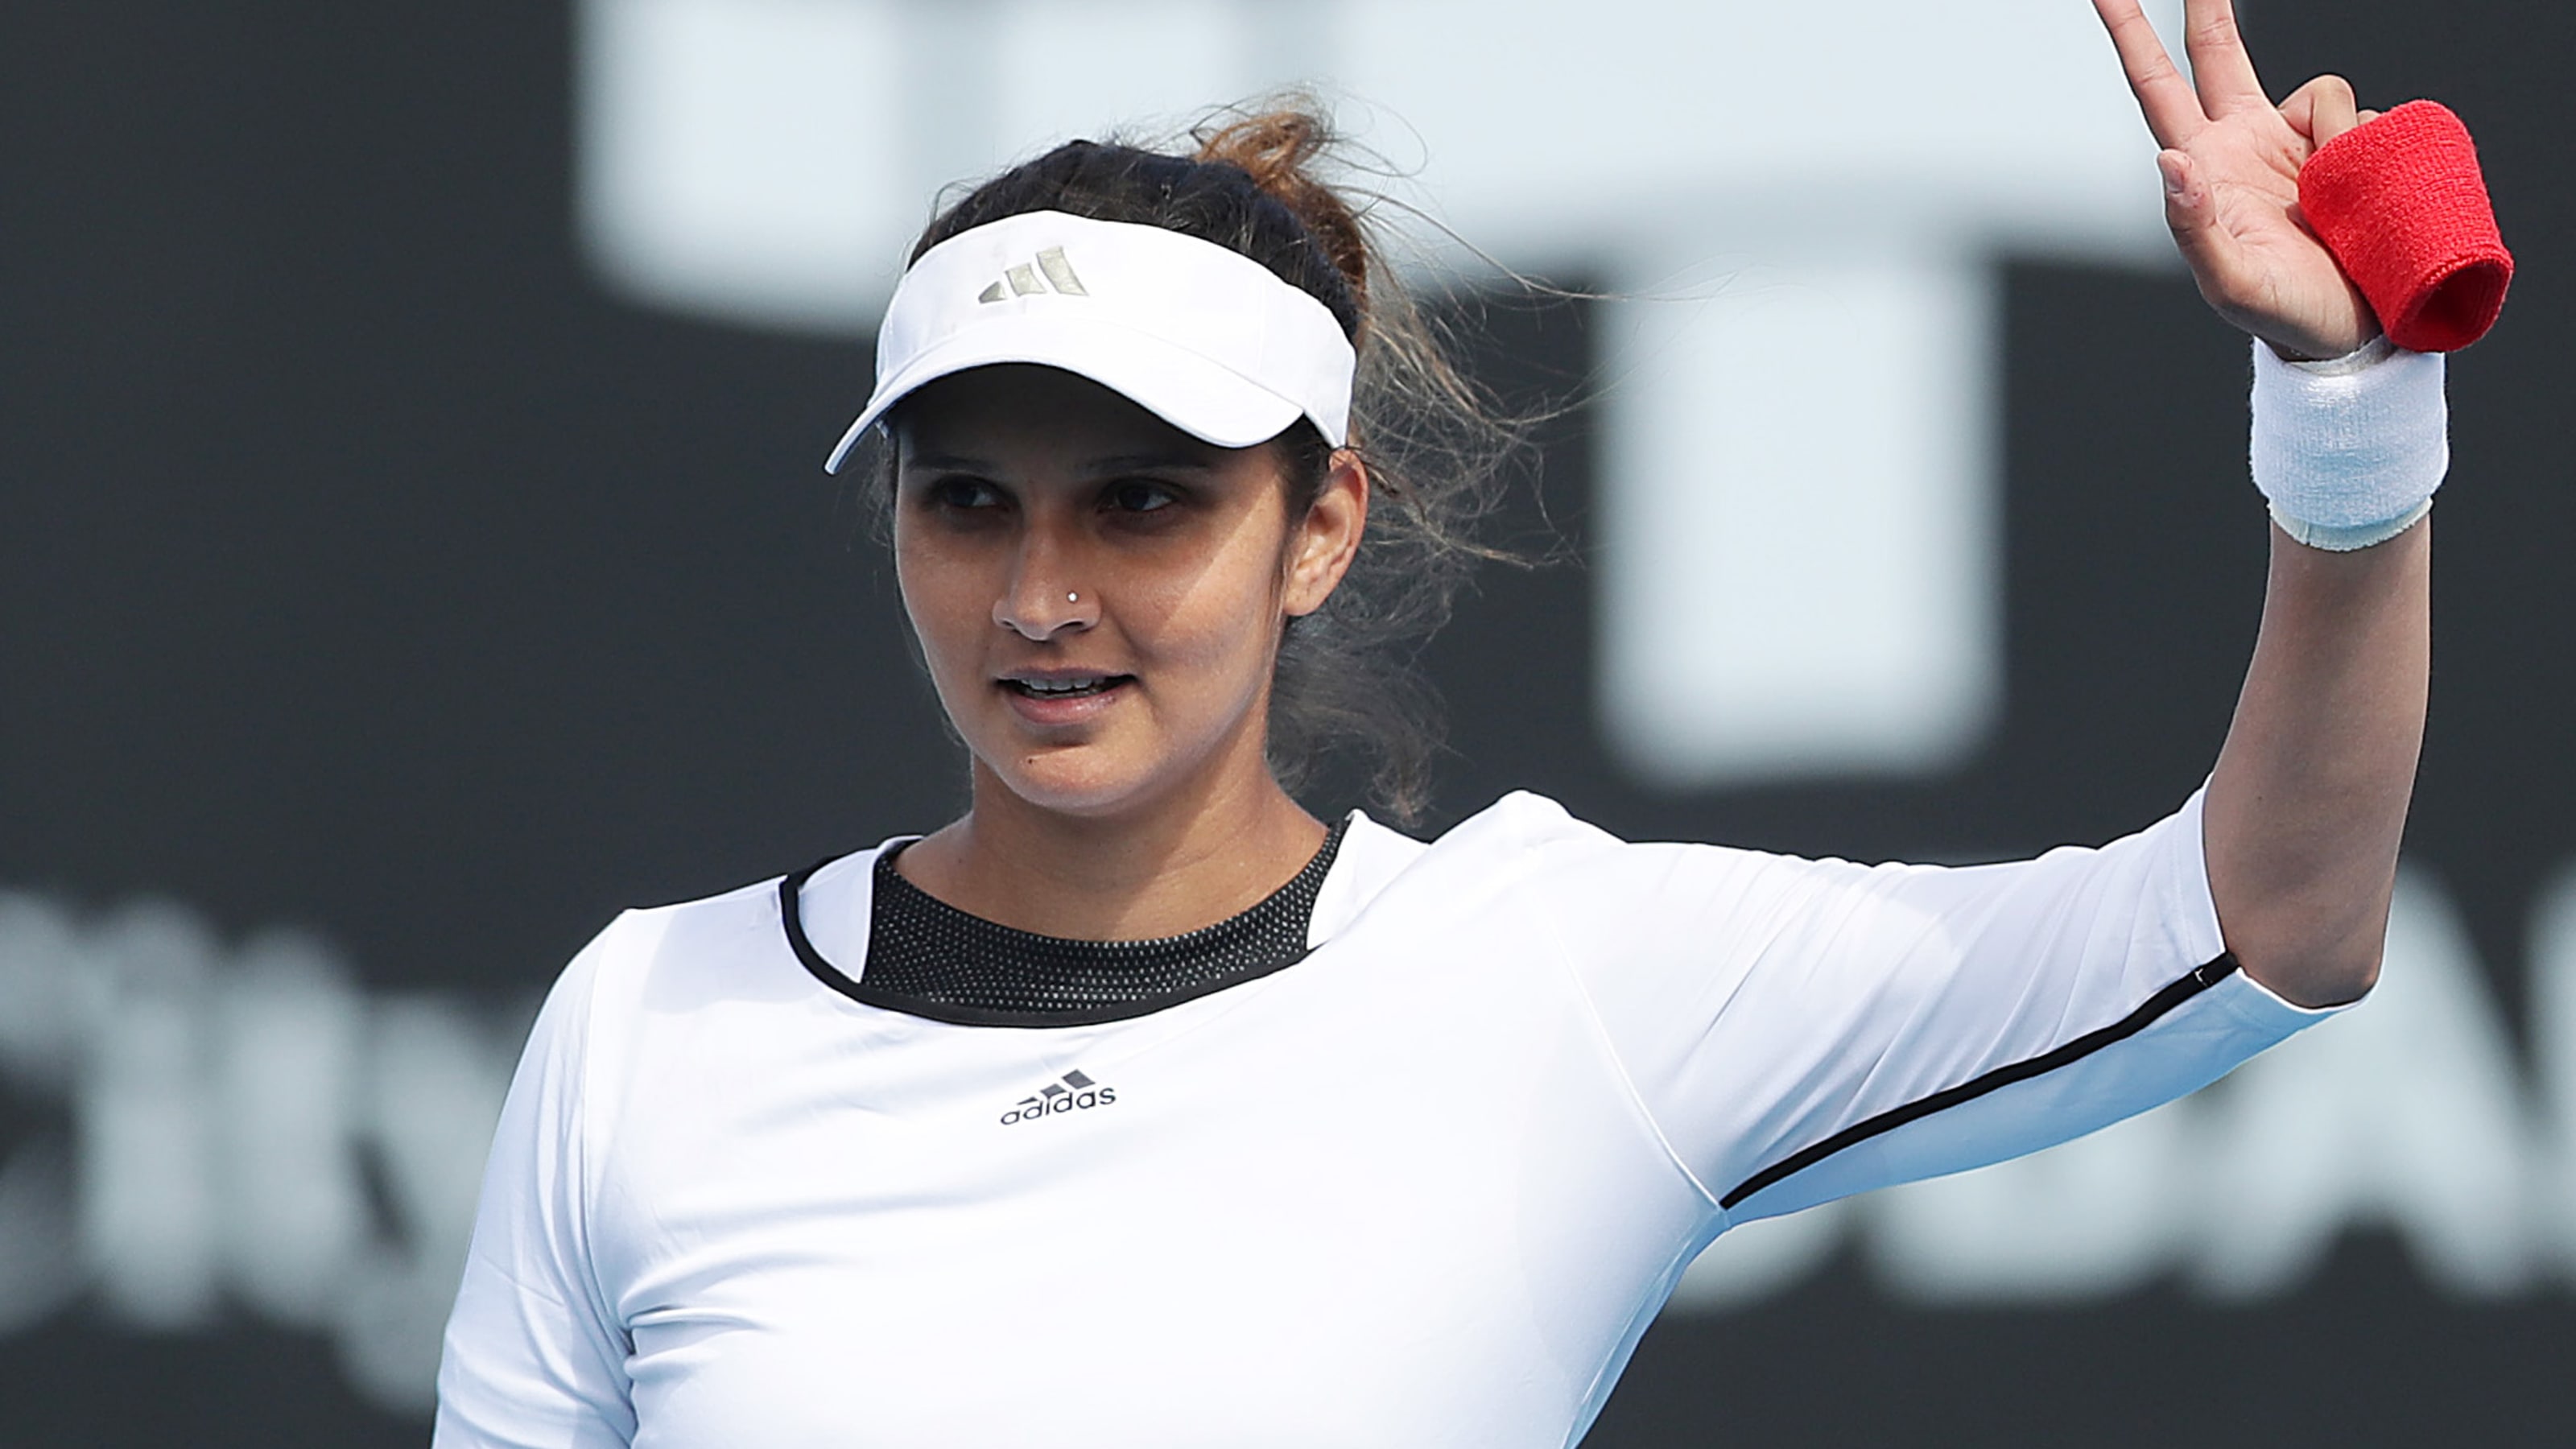 Sania Mirza moves into 2nd round of mixed doubles of Wimbledon